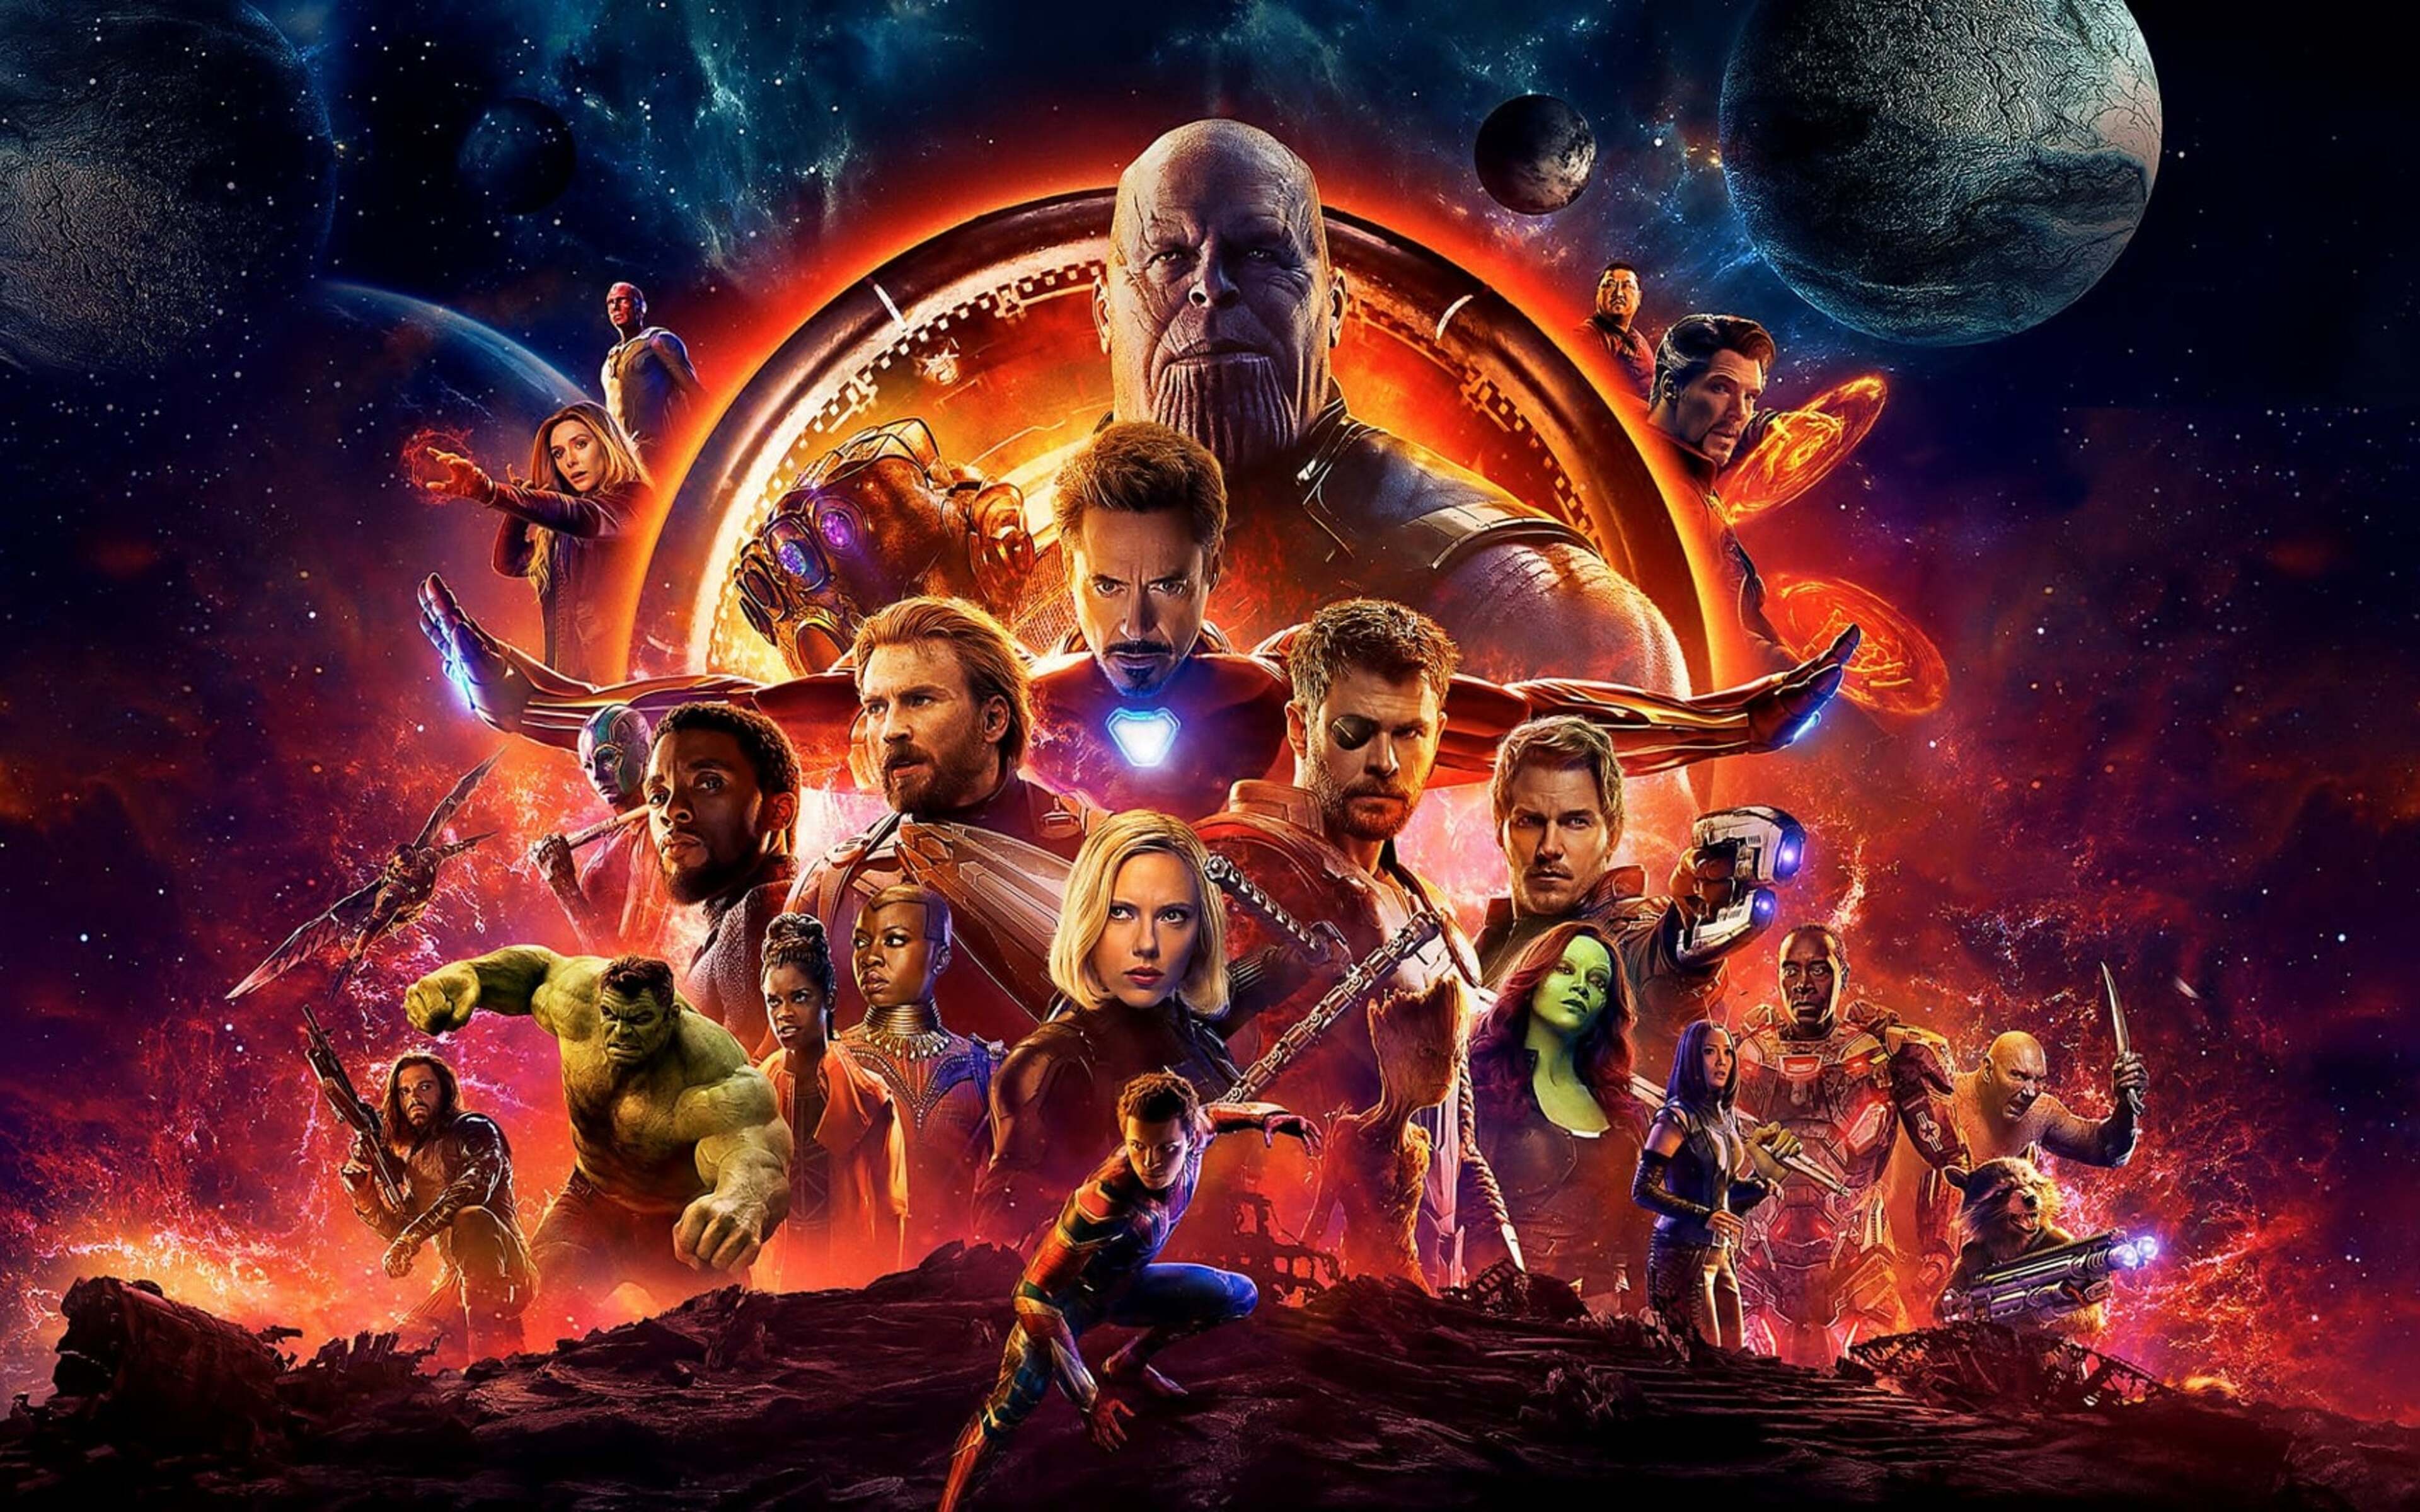 Avengers Infinity War Official Poster 2018 In 3840x2400 Resolution. 